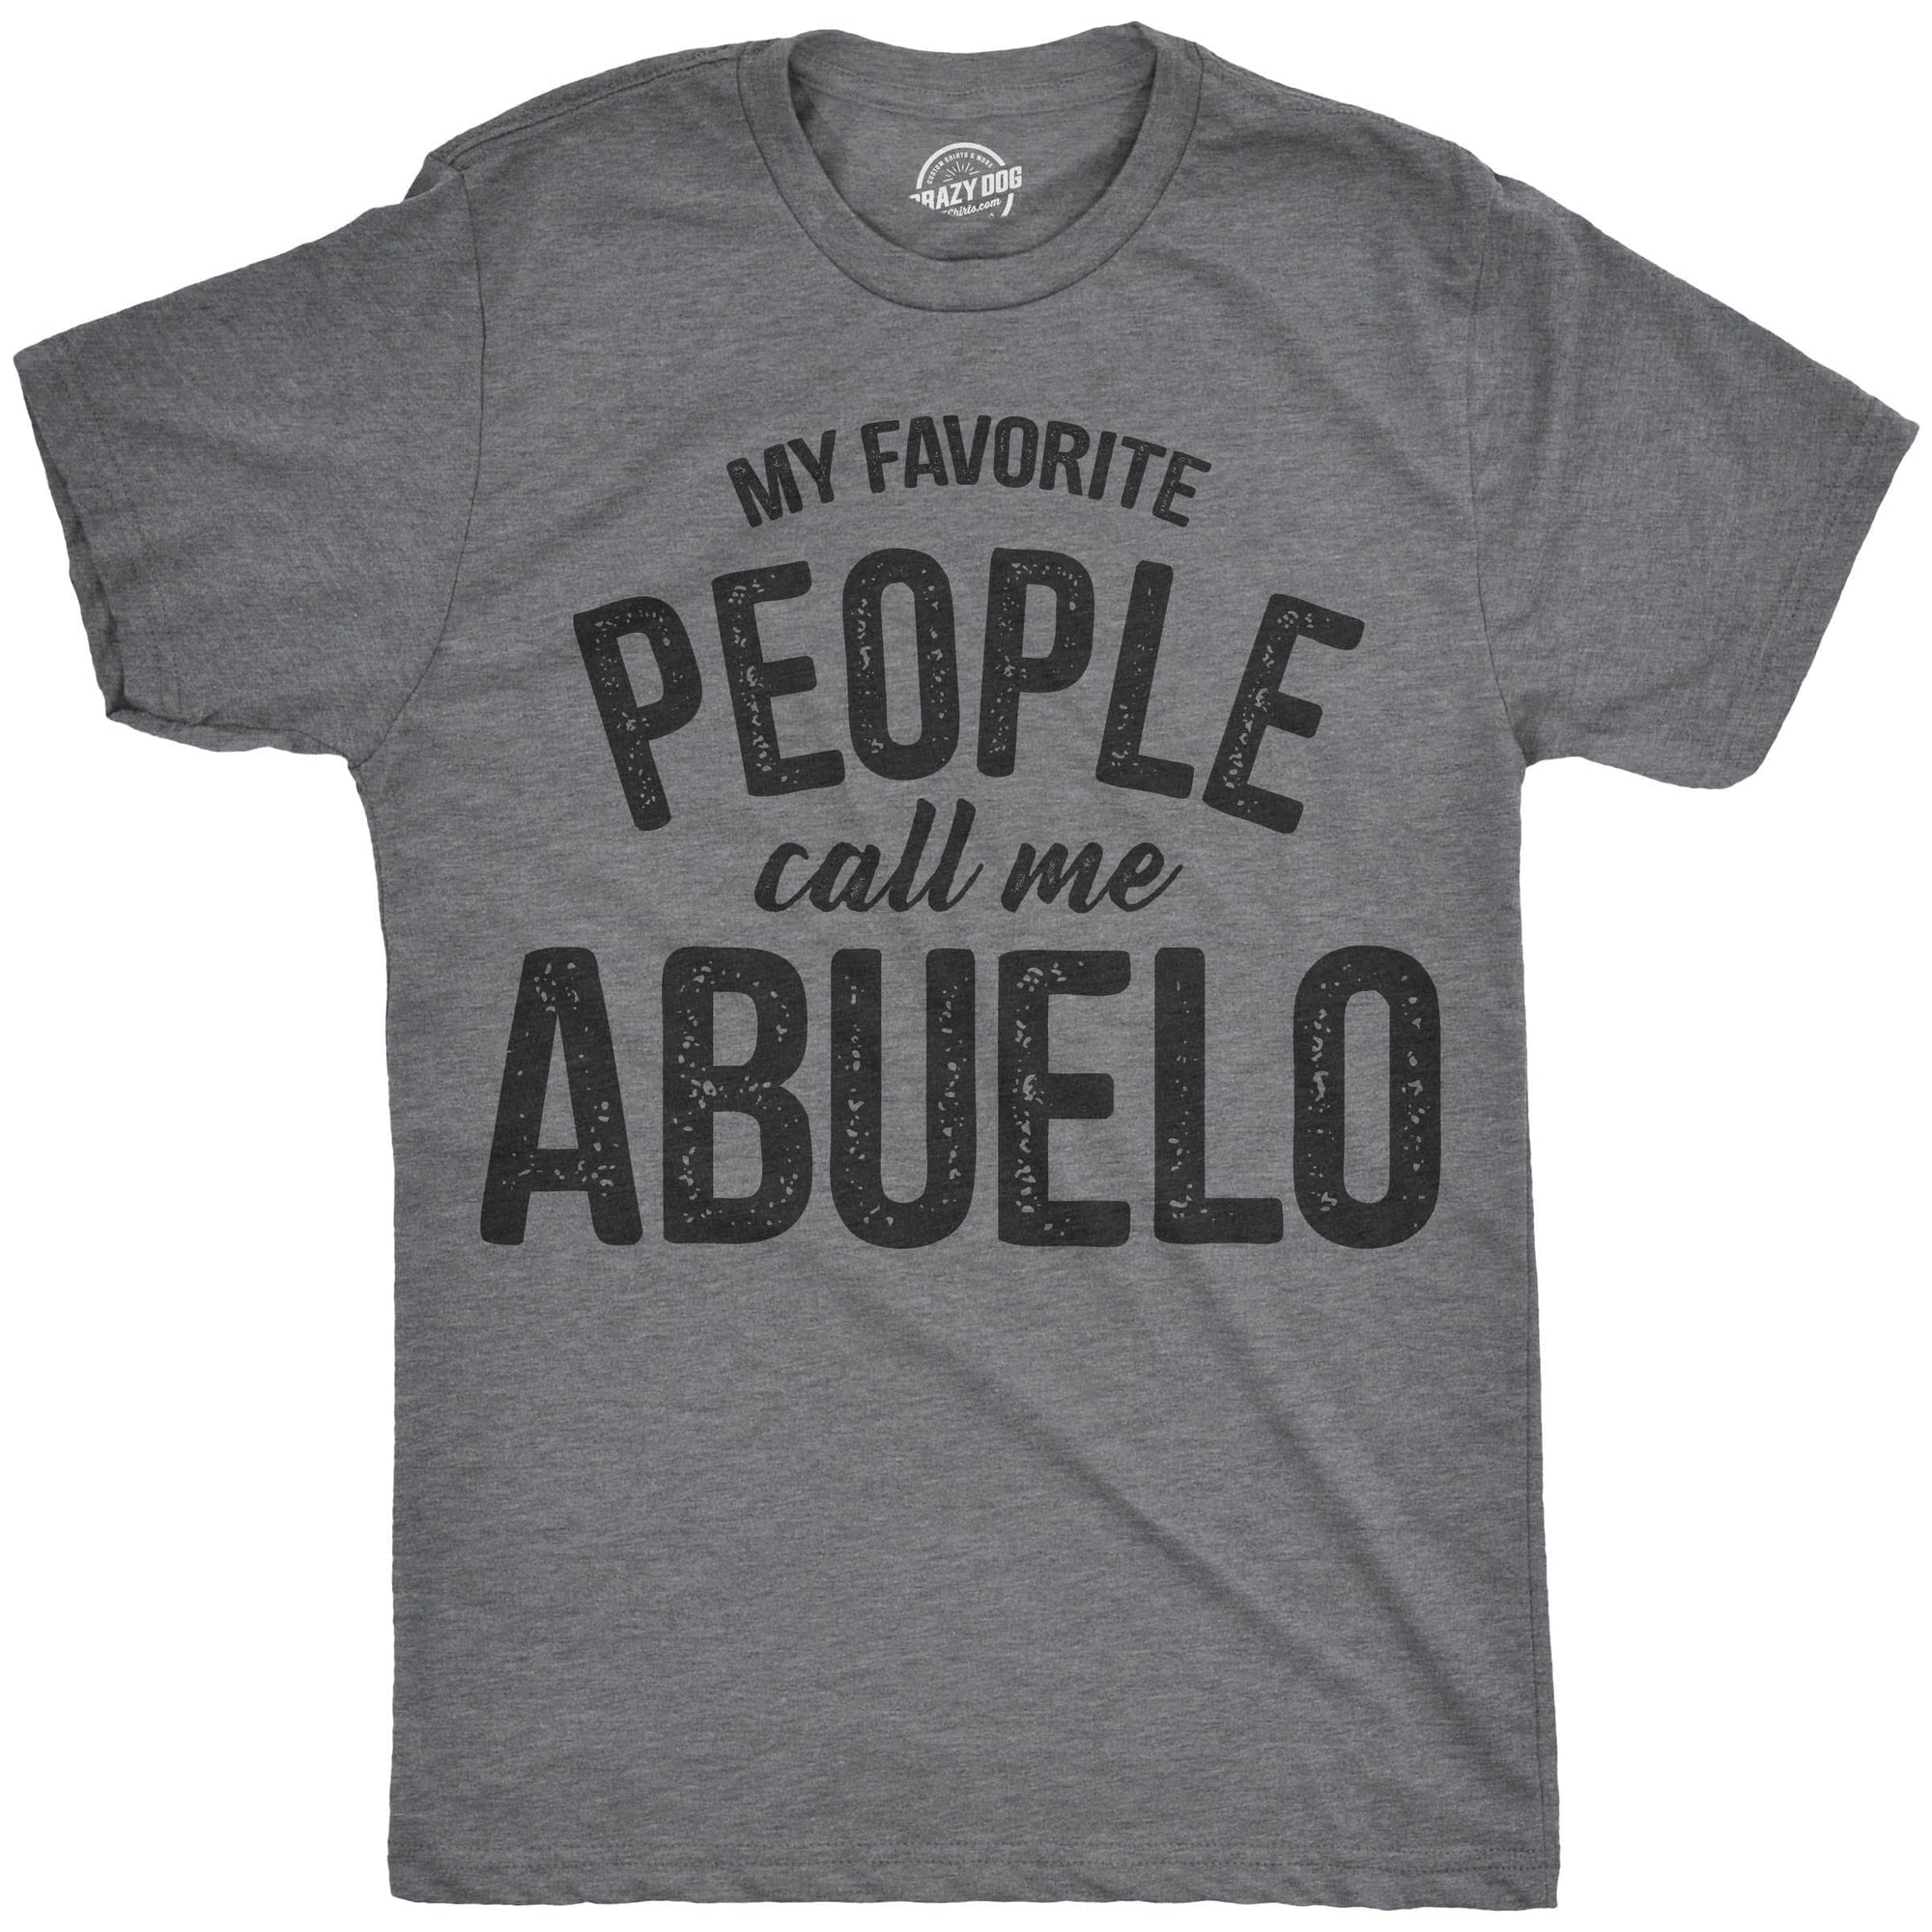 My Favorite People Call Me Abuelo Men's Tshirt  -  Crazy Dog T-Shirts